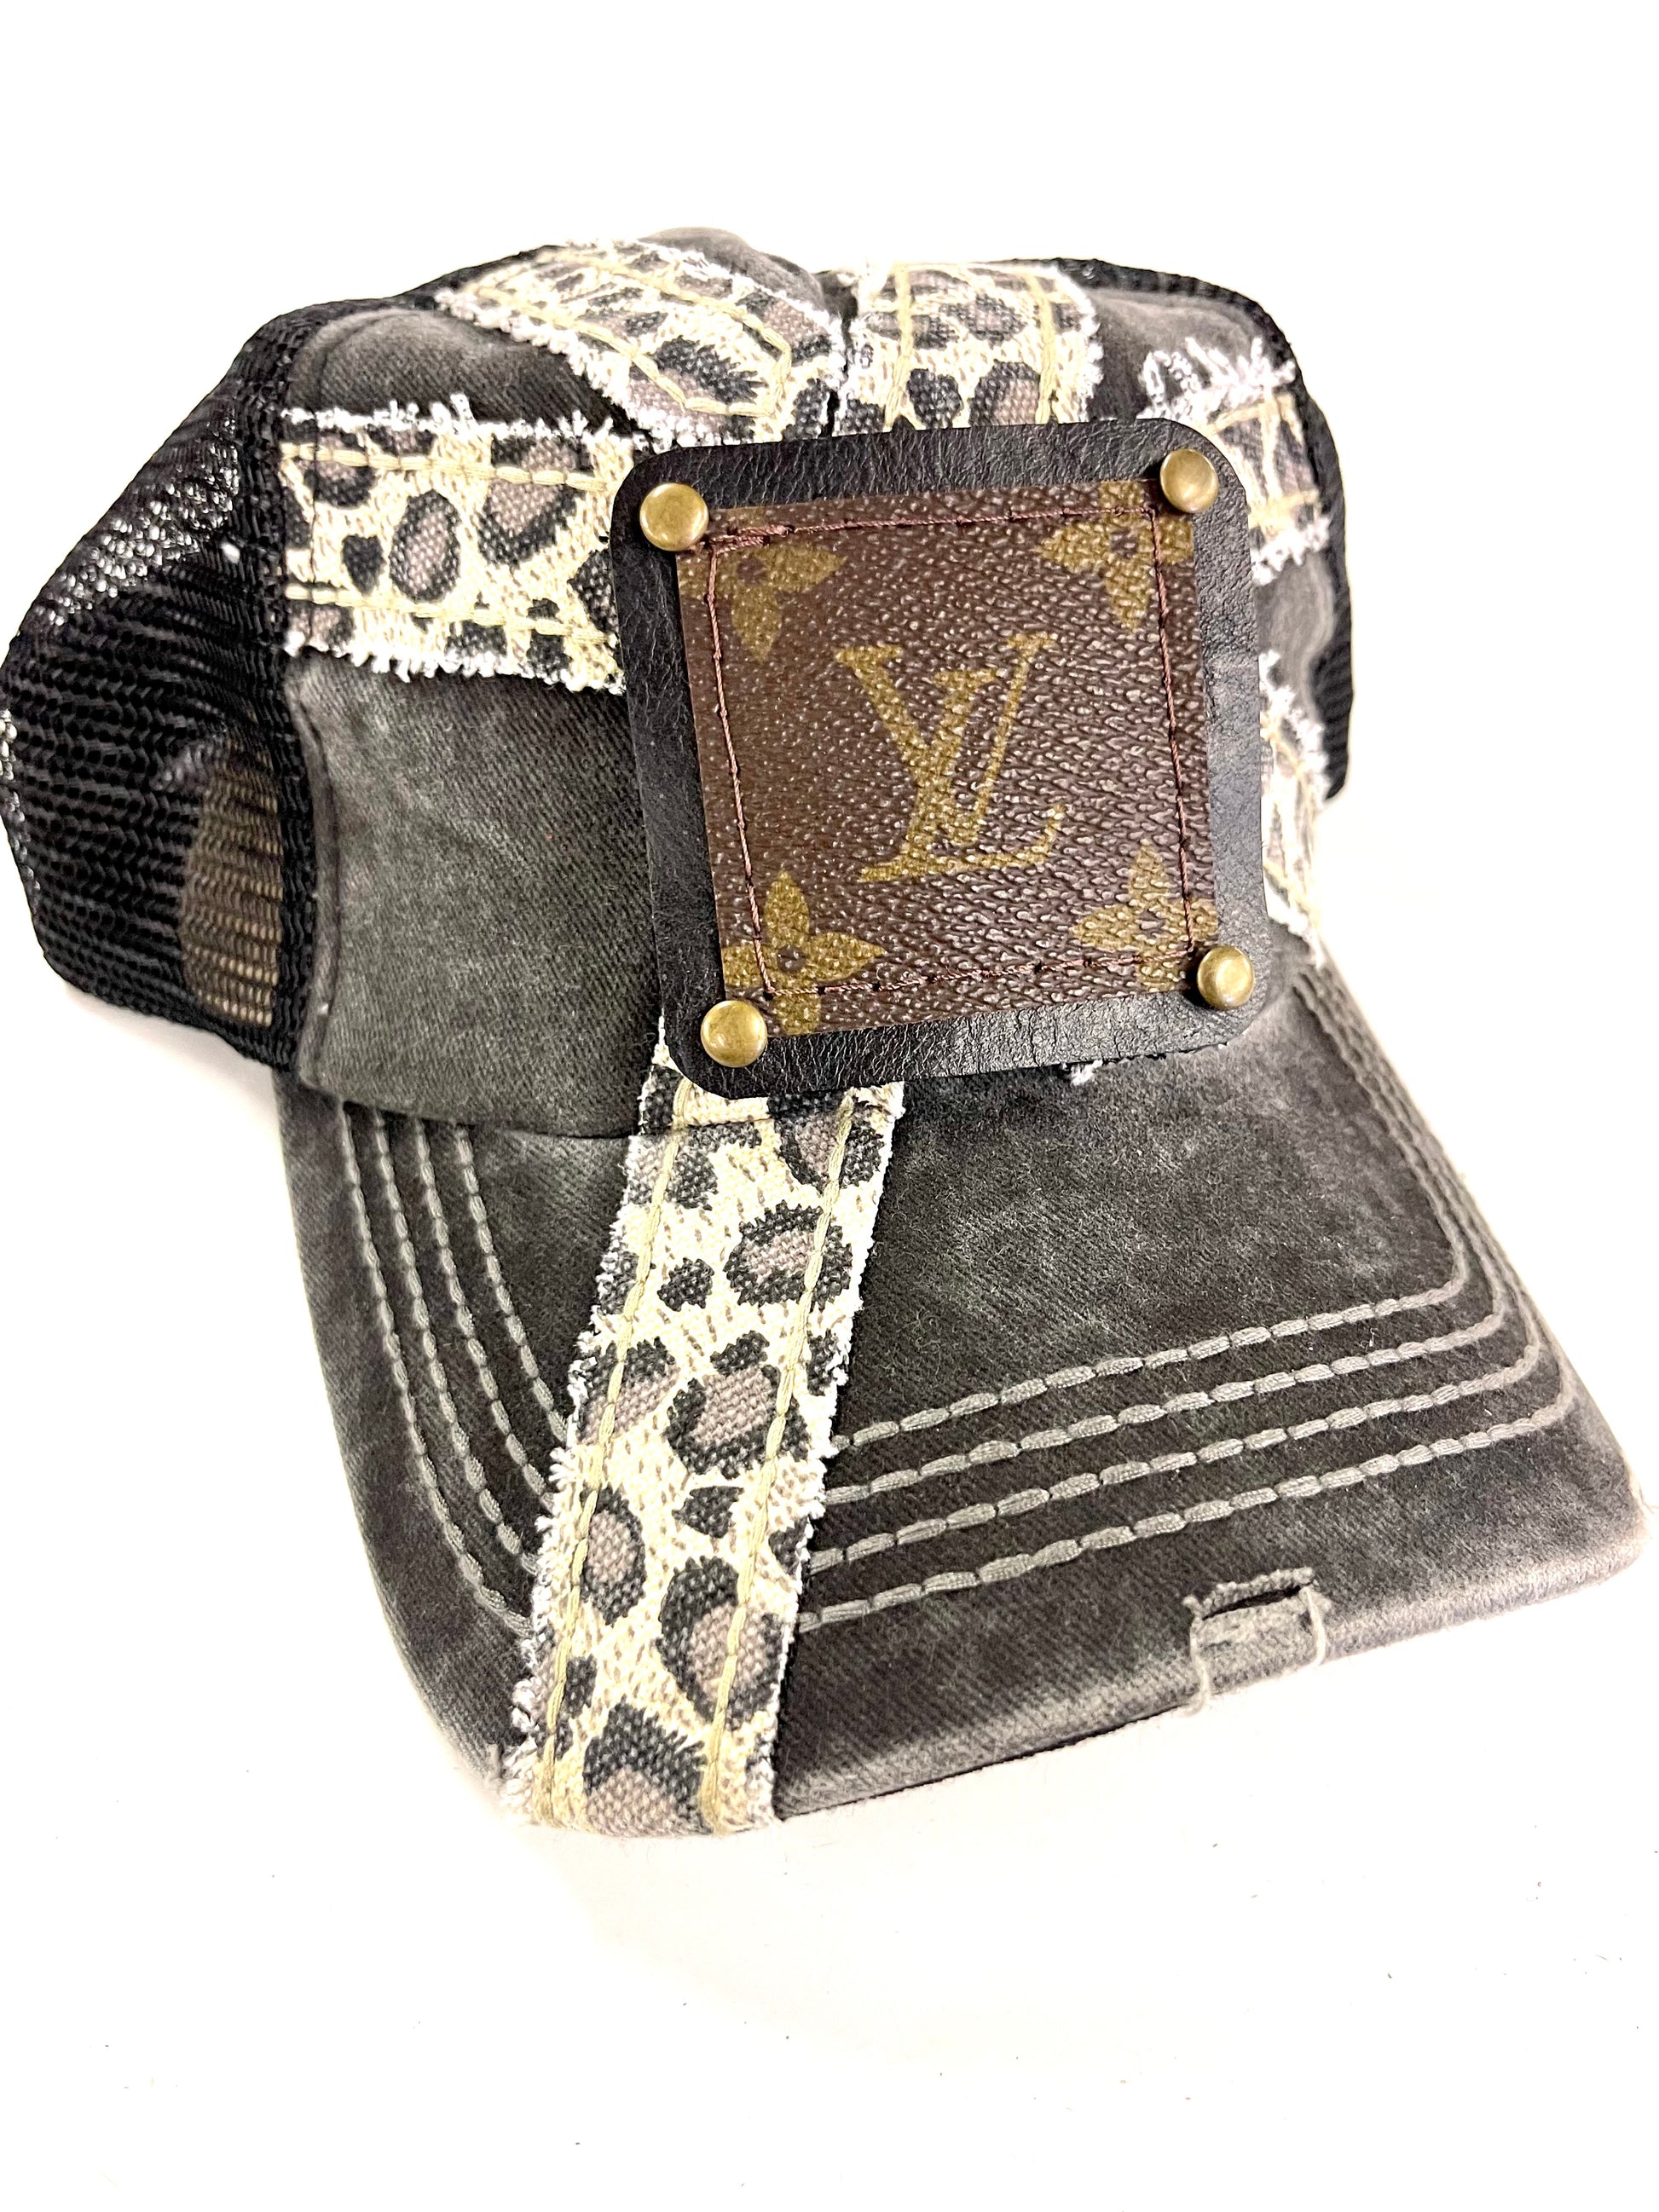 AAA2 Patched Cream Leopard, Black Mesh back Black/Antique - Patches Of Upcycling